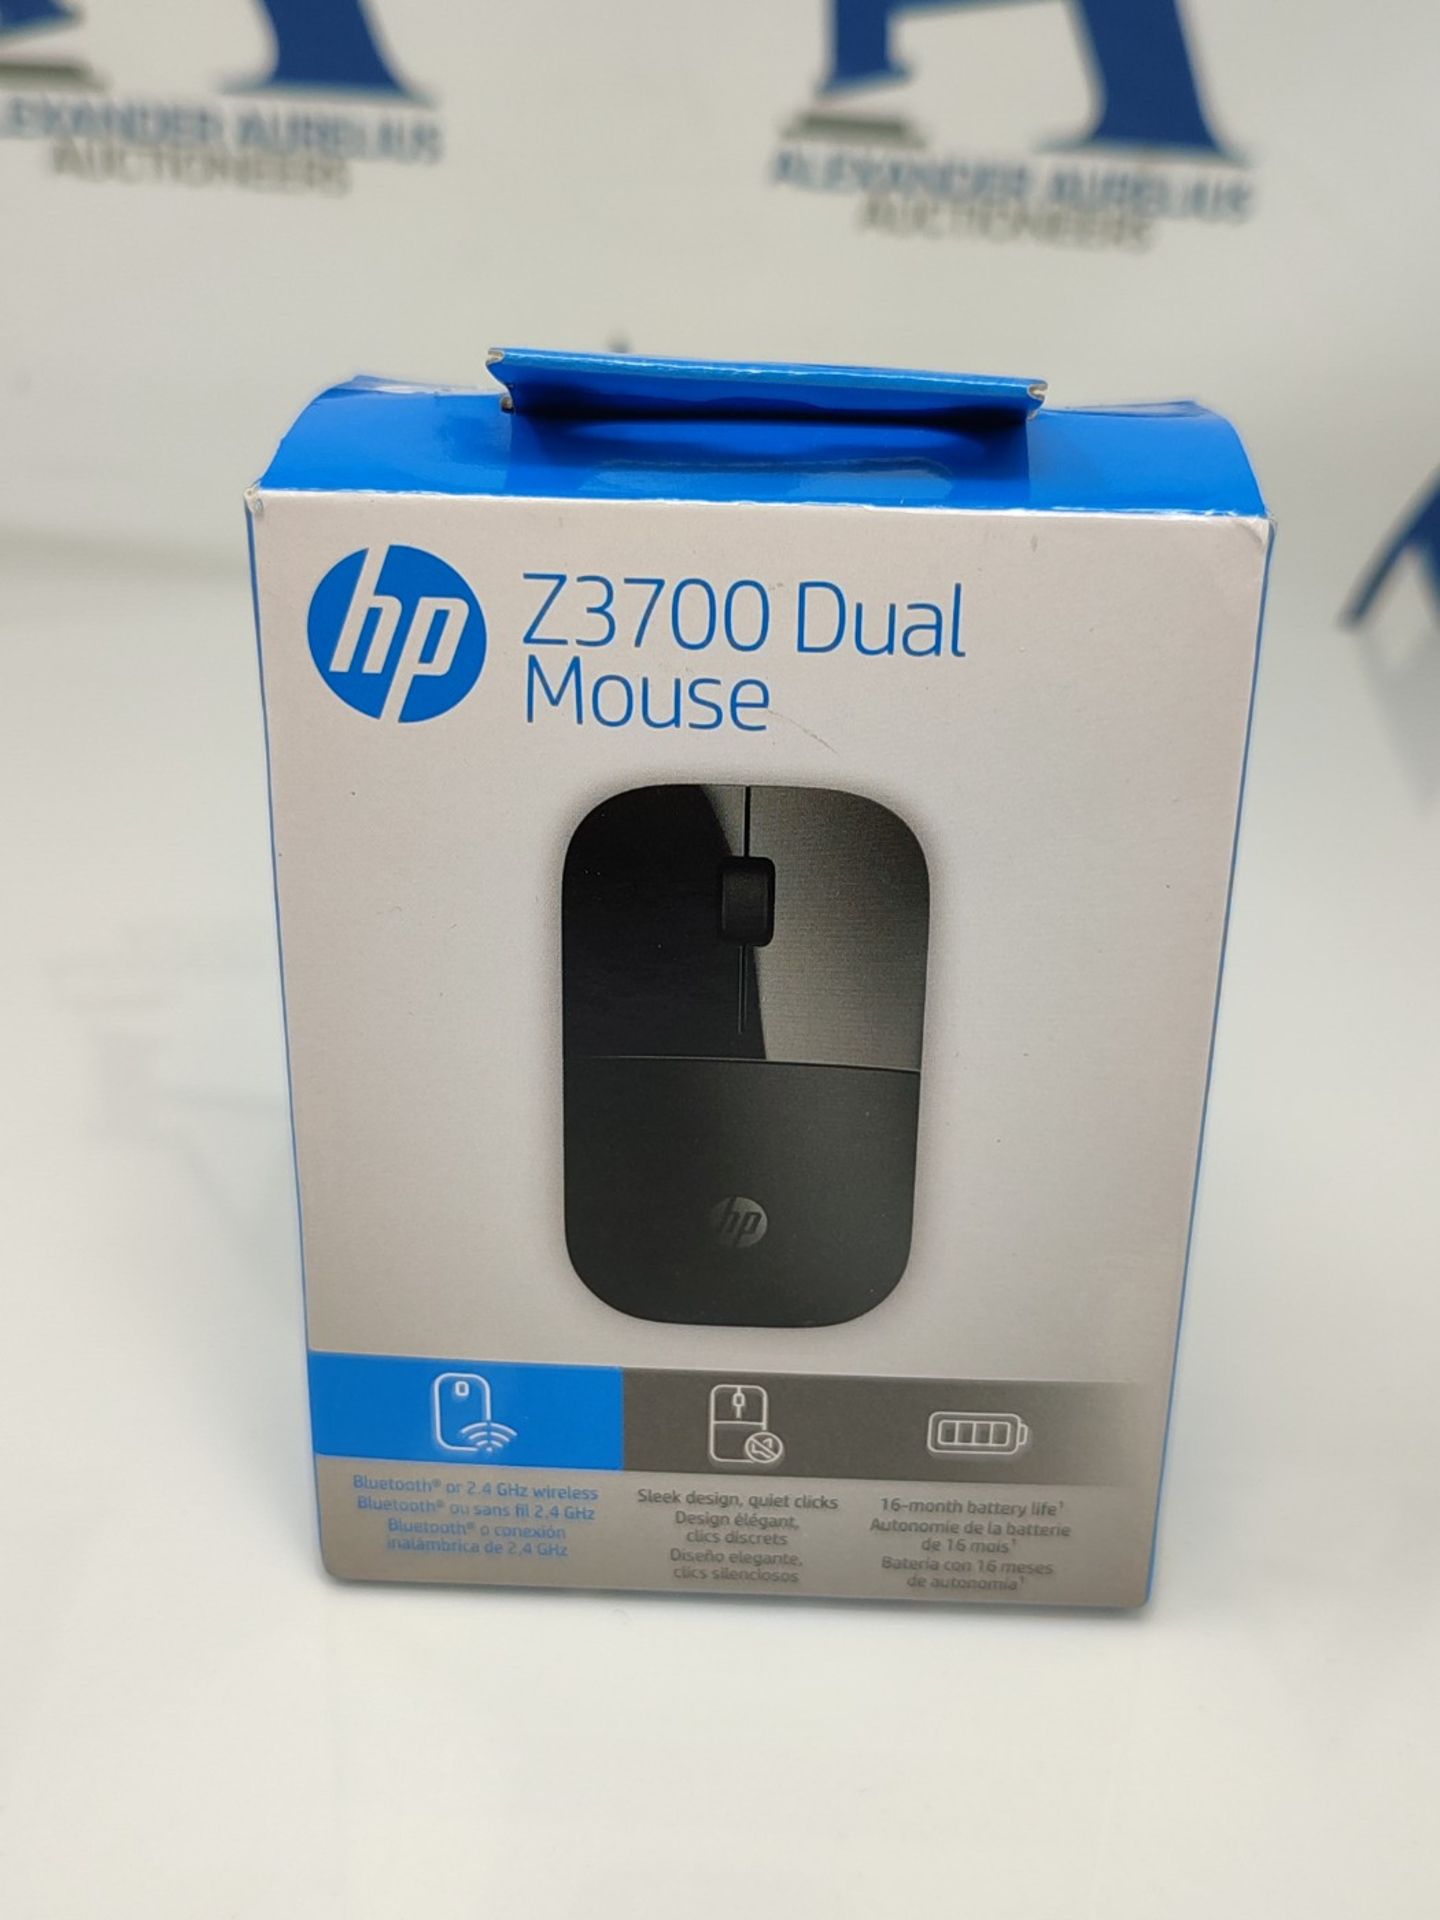 HP Z3700 wireless mouse | 1200 optical sensors | up to 16 months battery life | 2.4 GH - Image 2 of 3